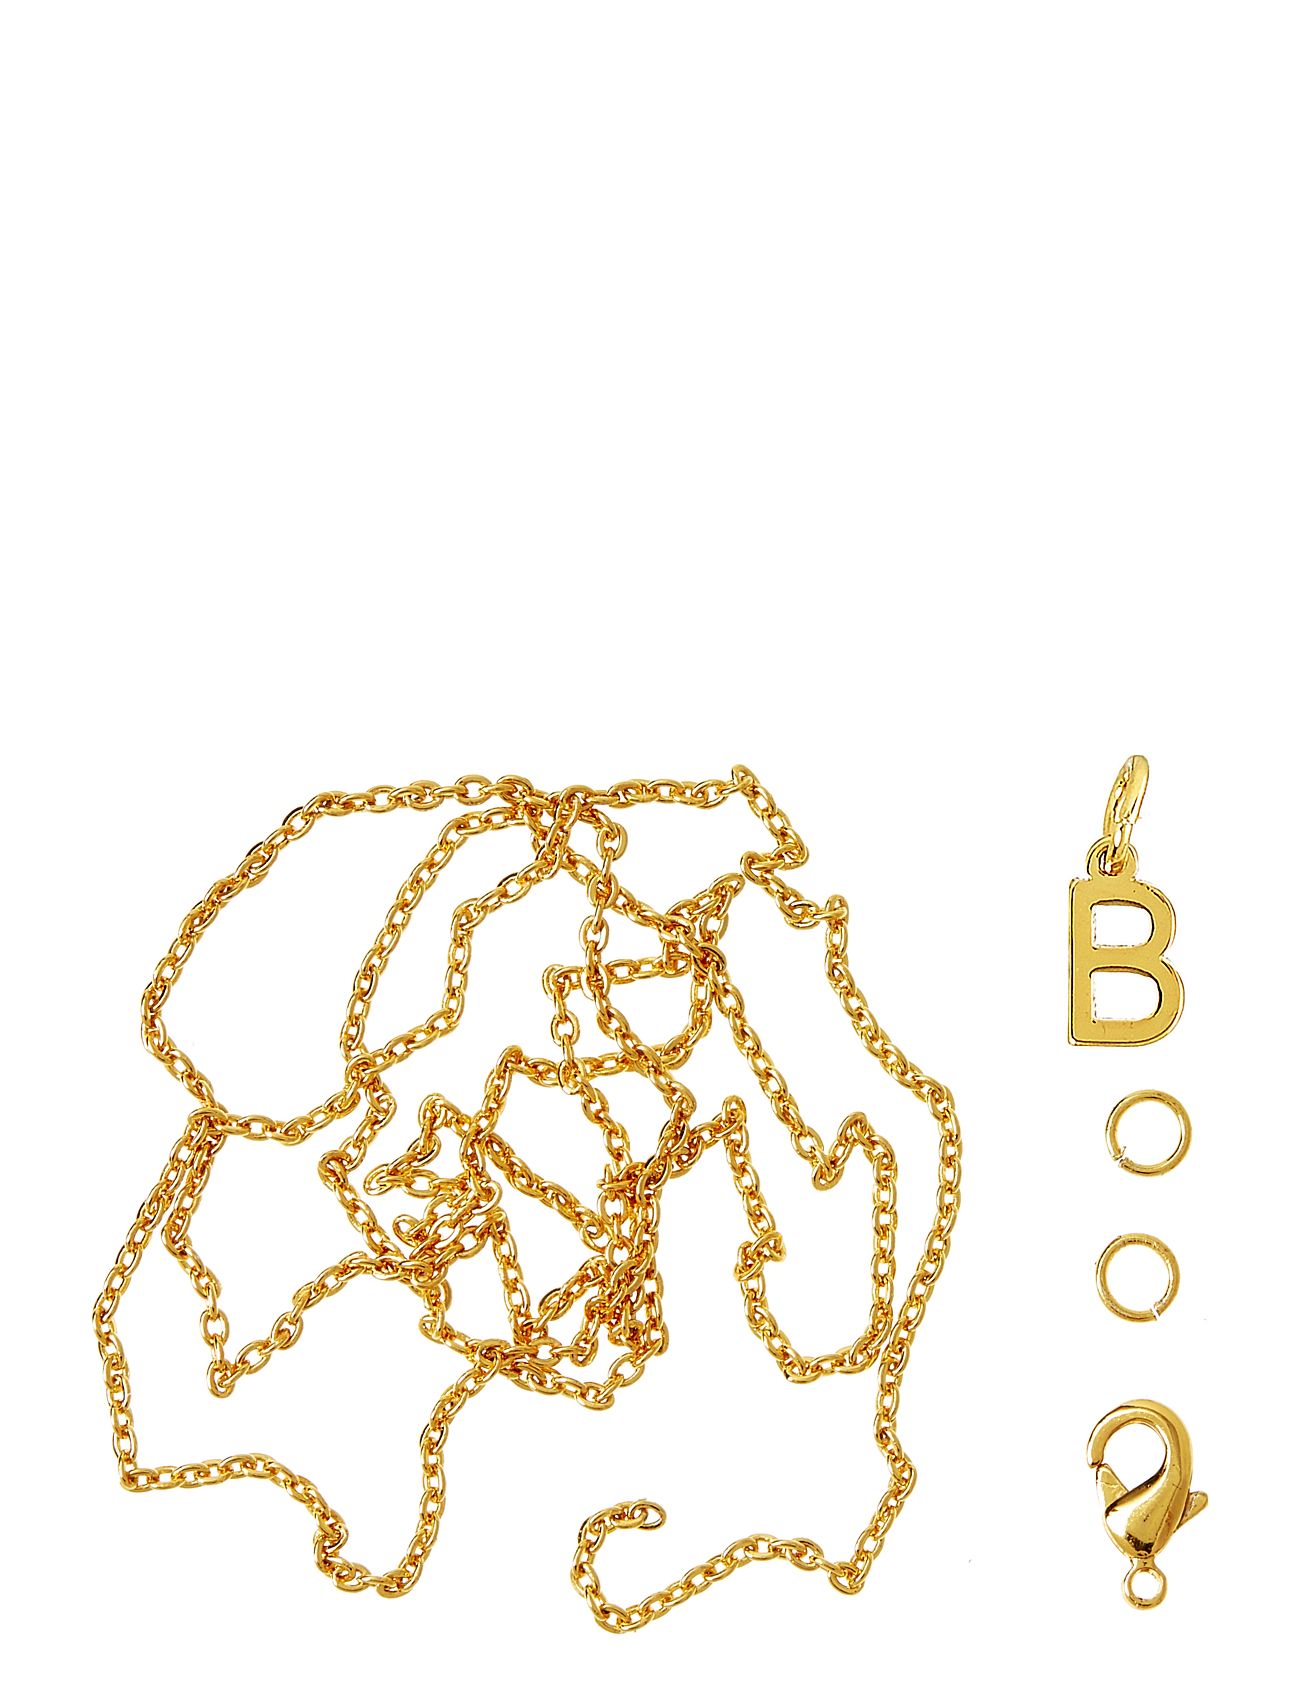 Letter B Gp With O-Ring Chain And Clasp Toys Creativity Drawing & Crafts Craft Jewellery & Accessories Gold Me & My Box